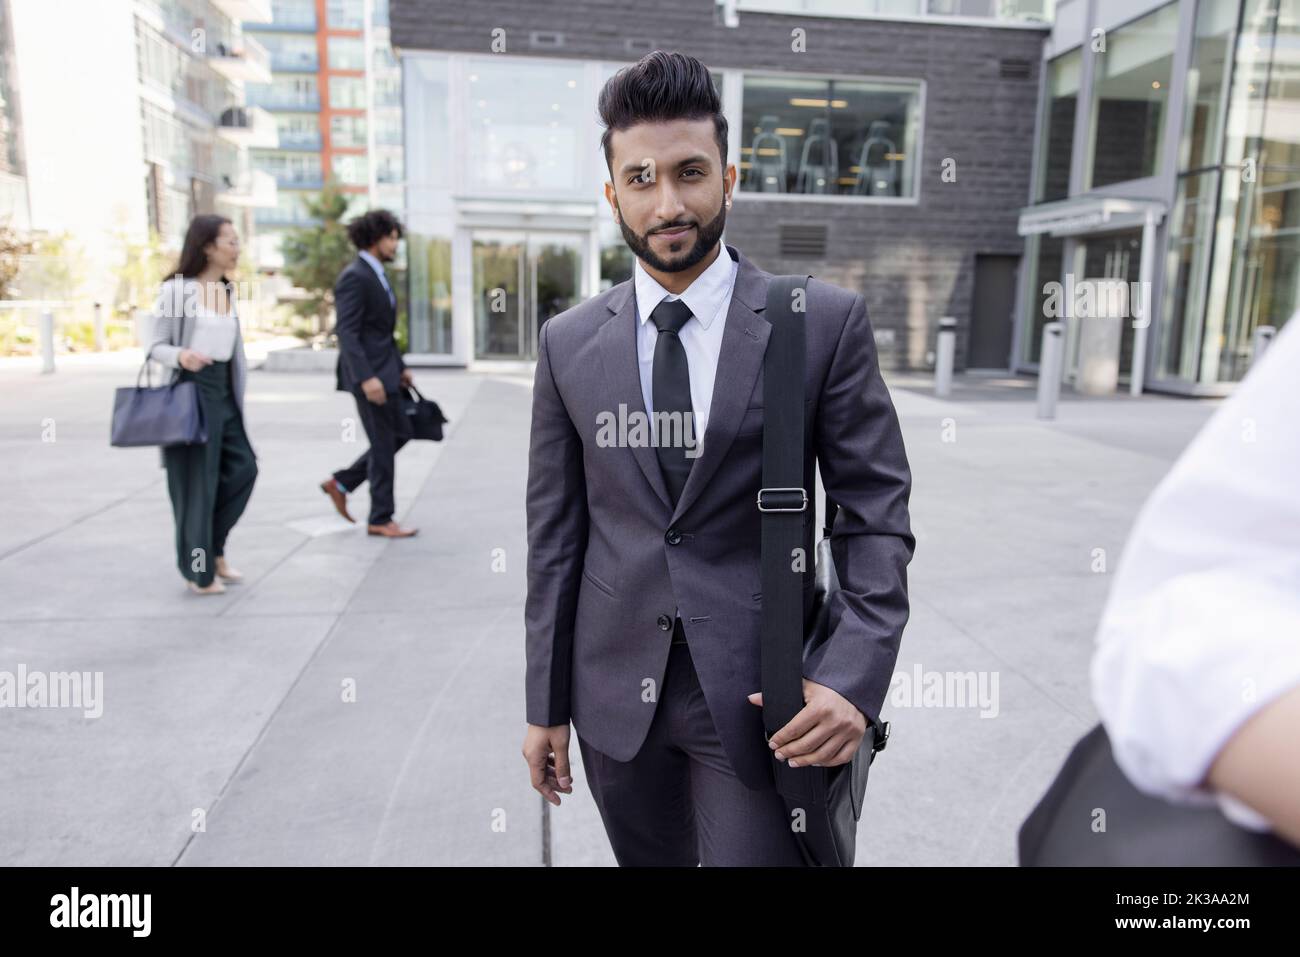 Portrait of south asian businessman outside office Stock Photo